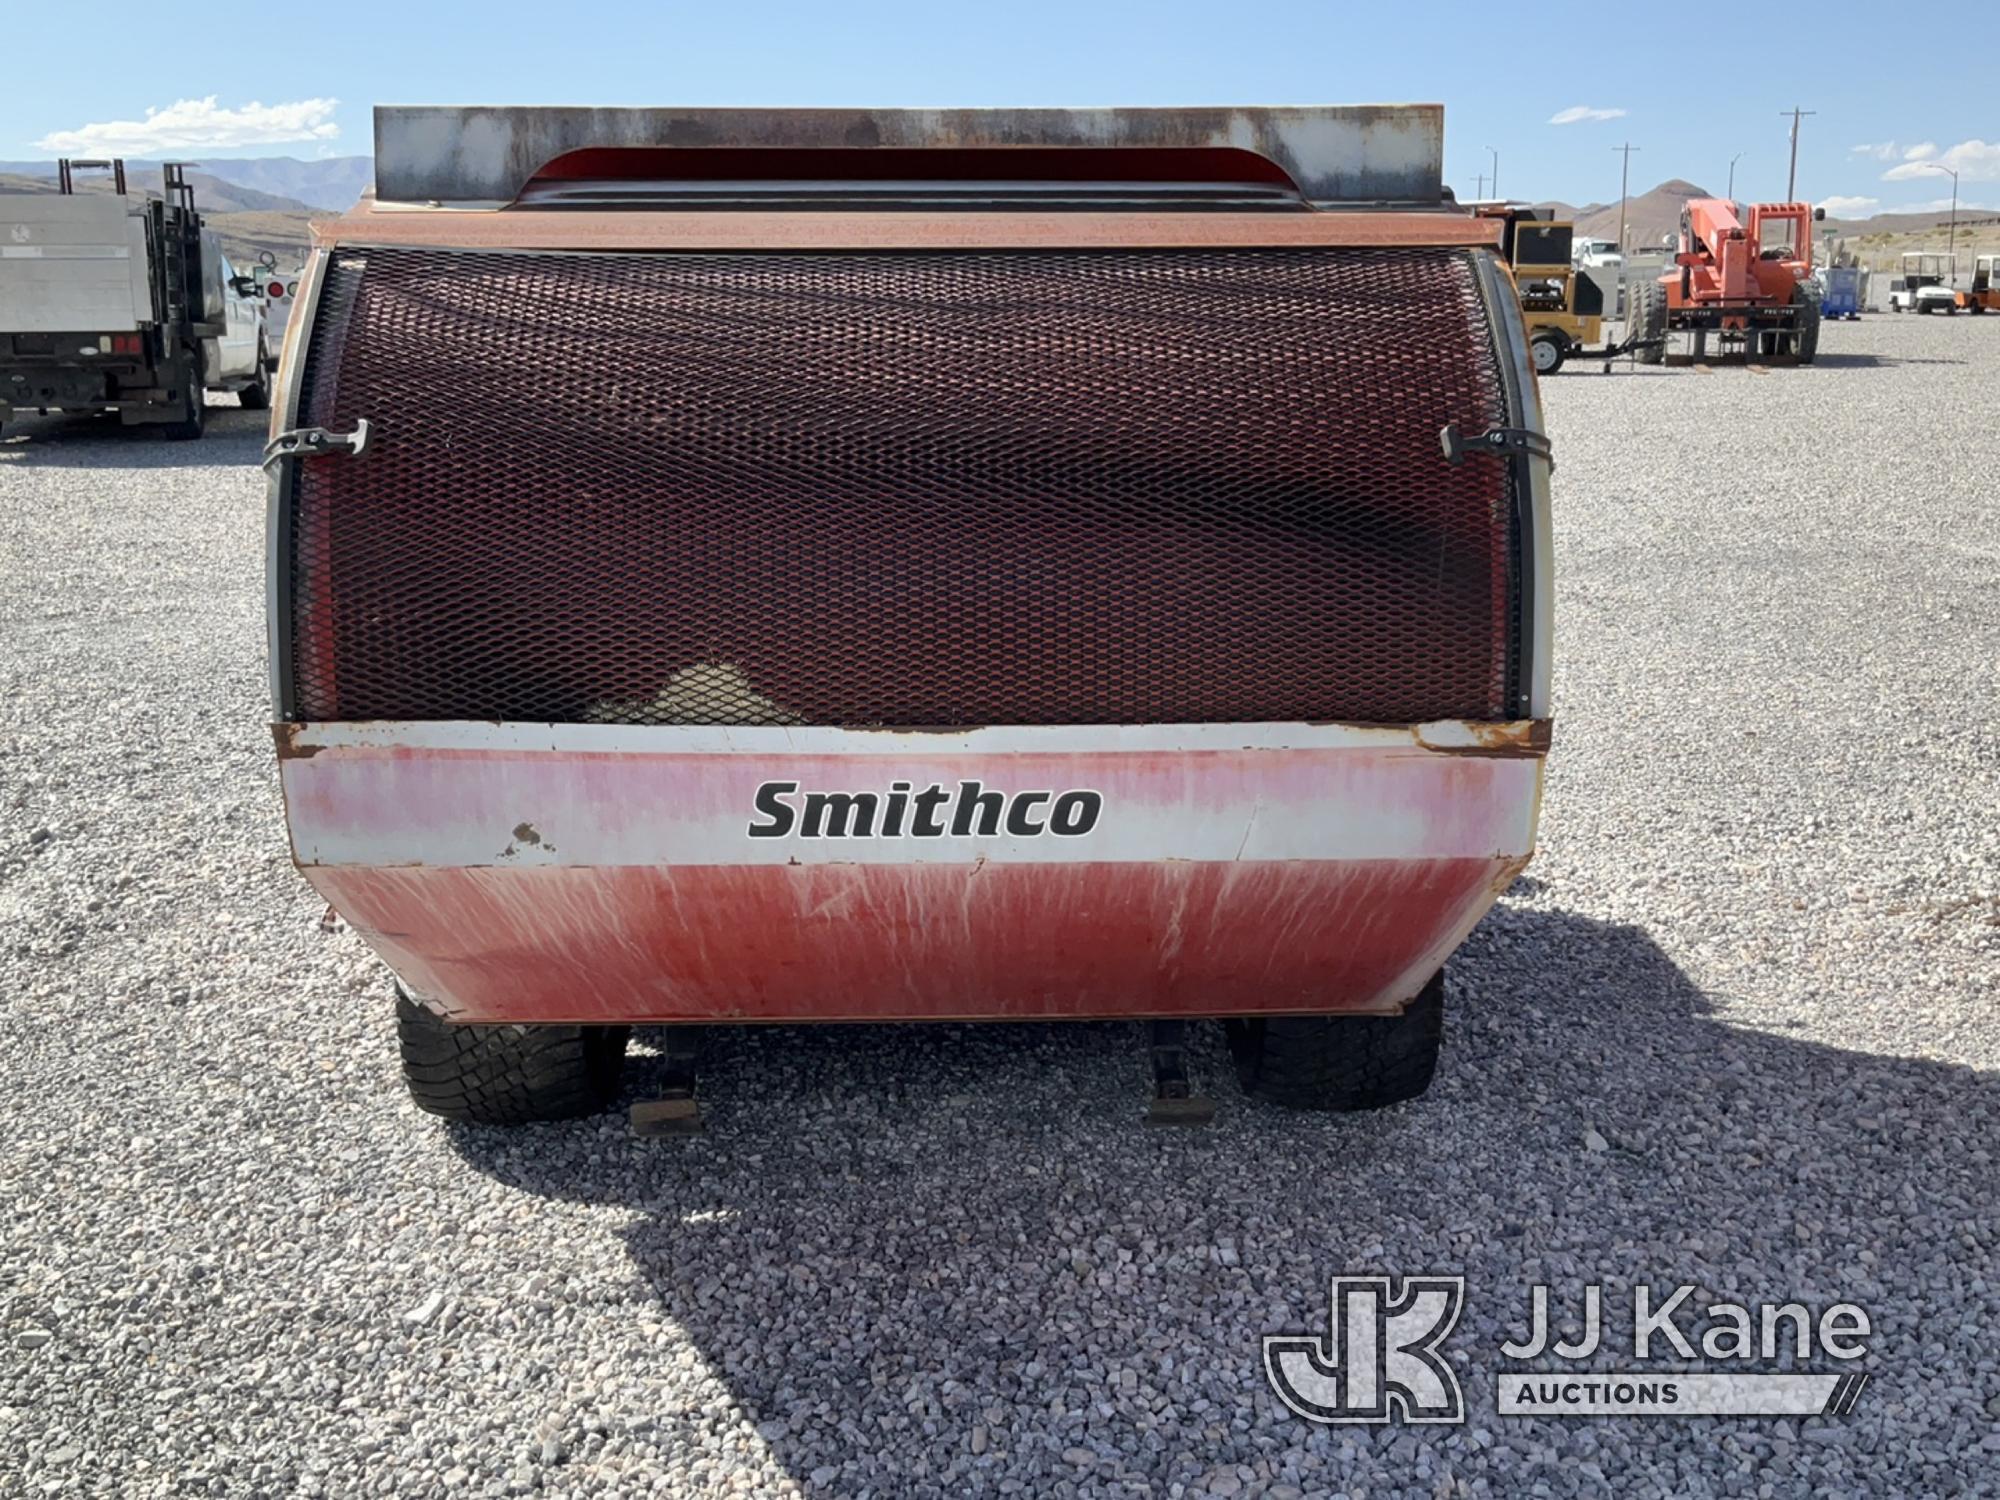 (Las Vegas, NV) 2002 Smith Co Sweep Star 60 No Key, Will Not Start & Does Not Move